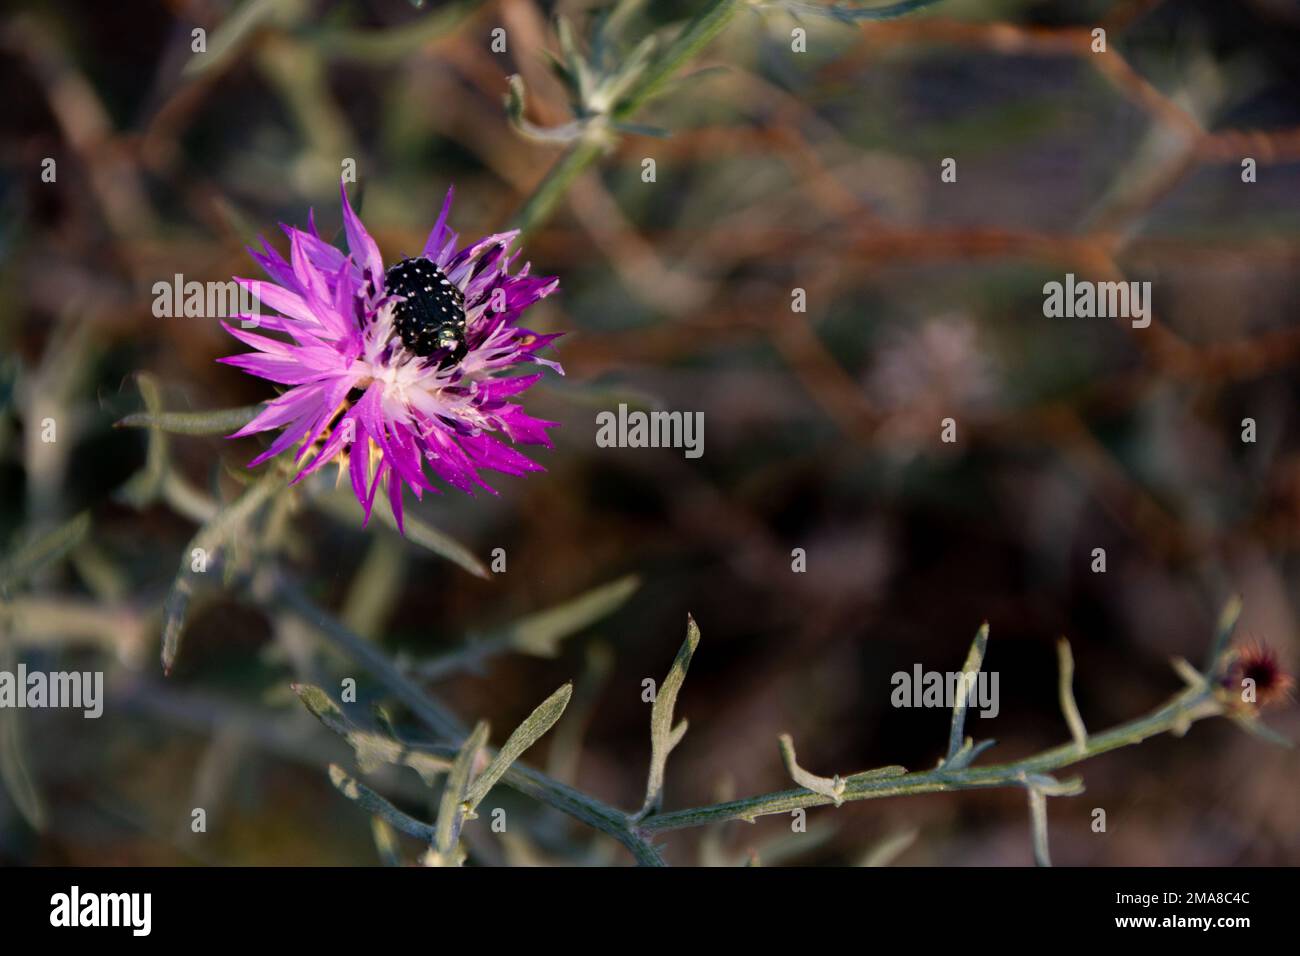 A white spotted rose beetle on a purple milk thistle flower. Stock Photo